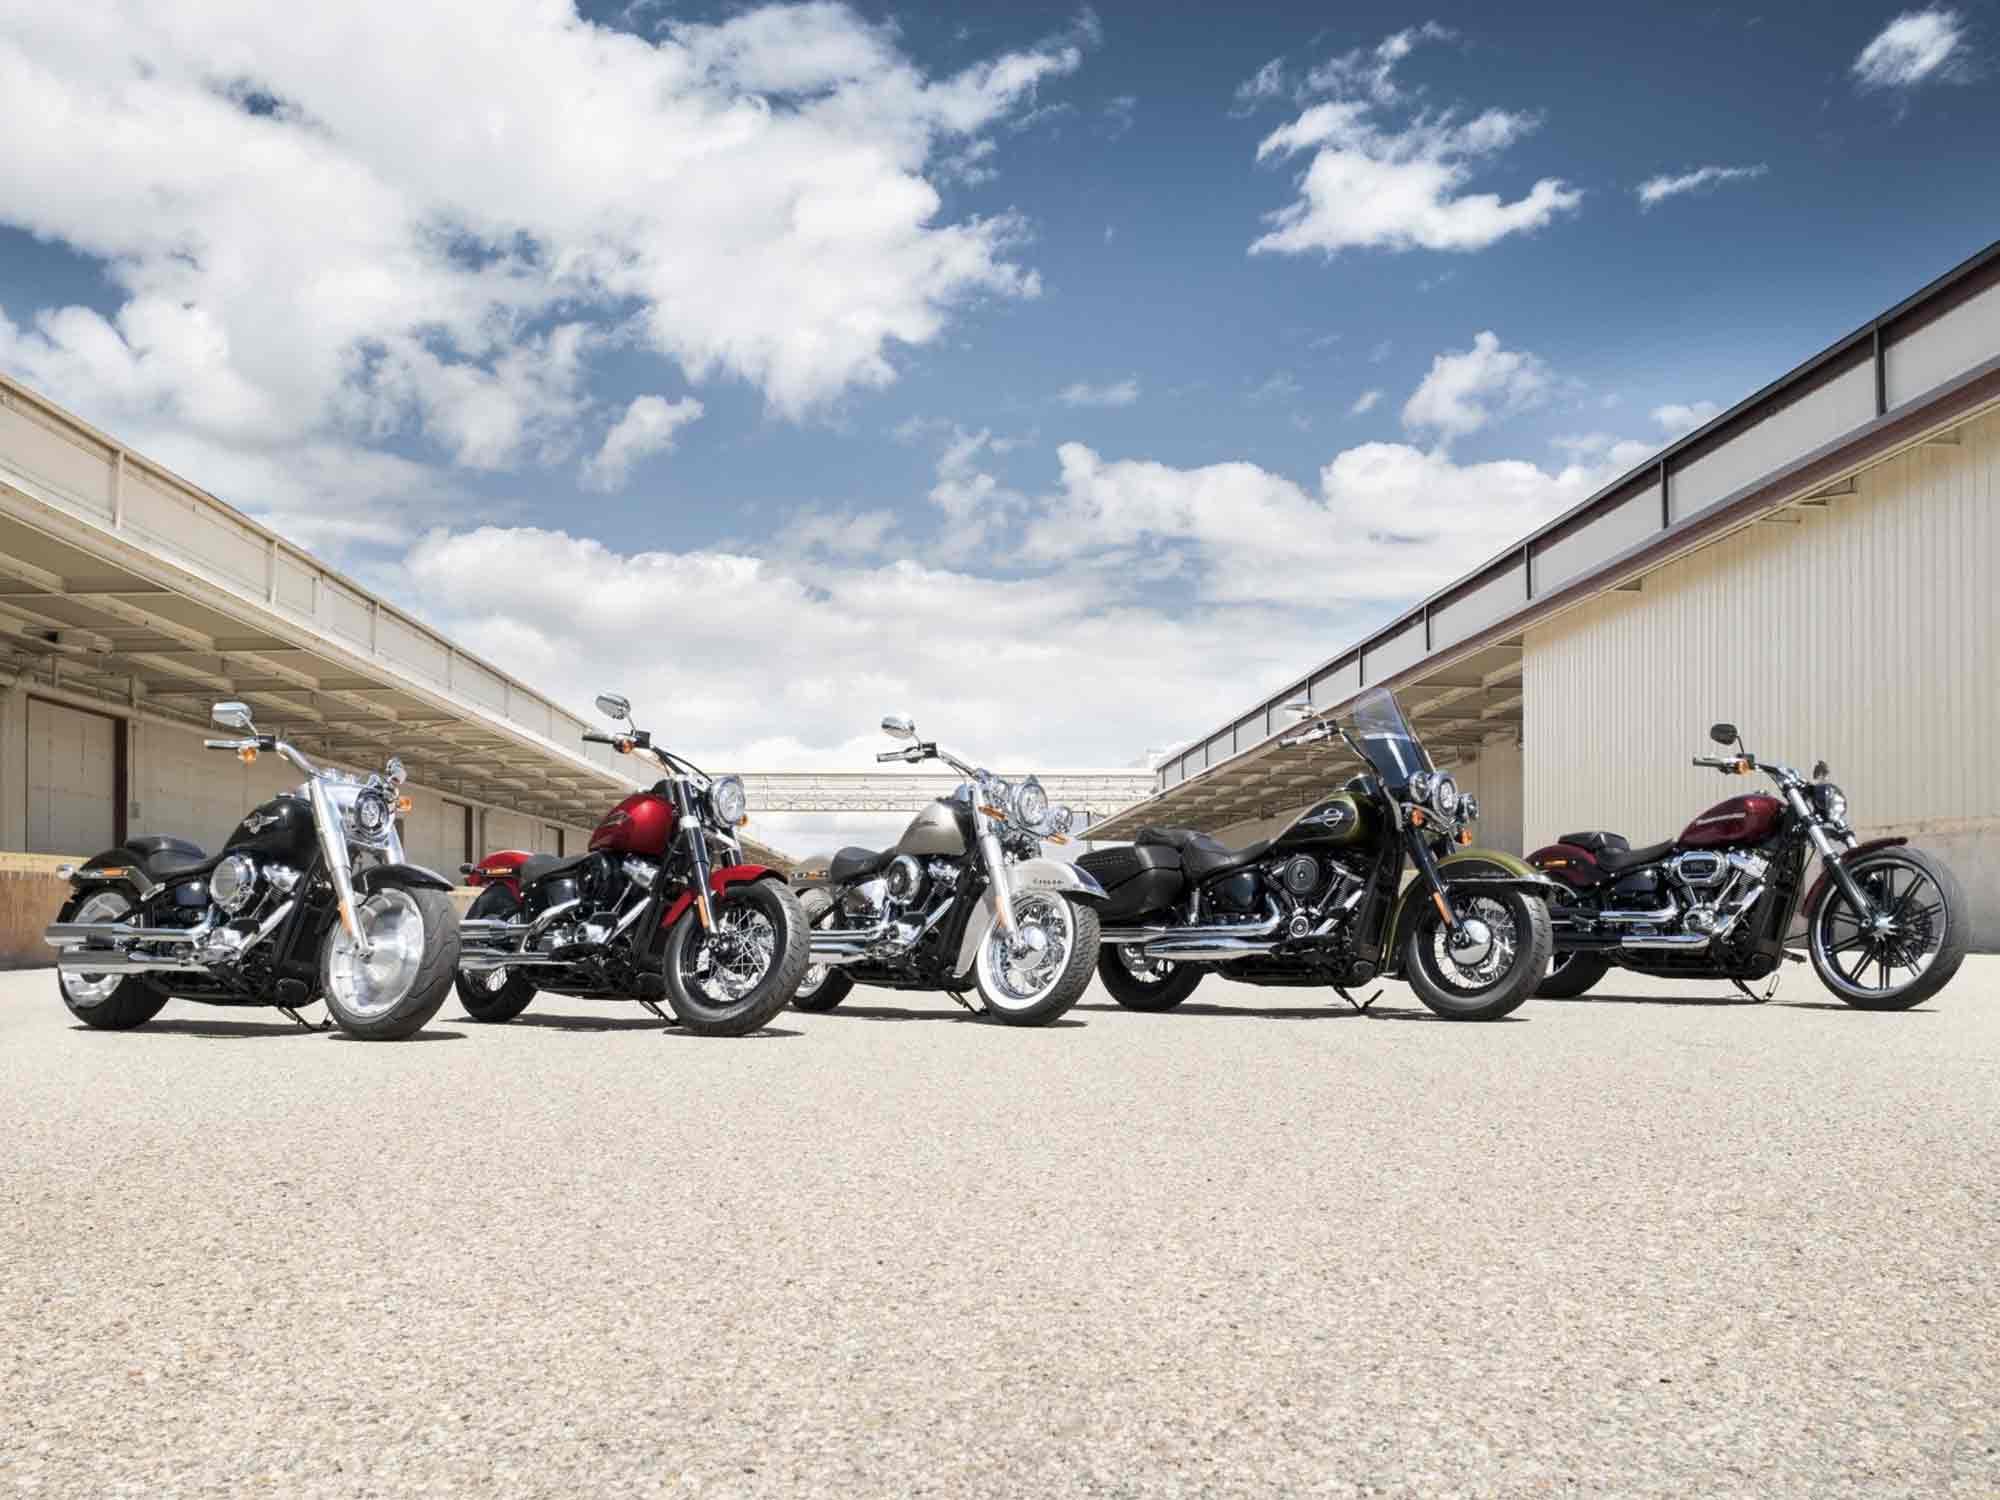 Harley-Davidson Now Has a Certified Pre-owned Program